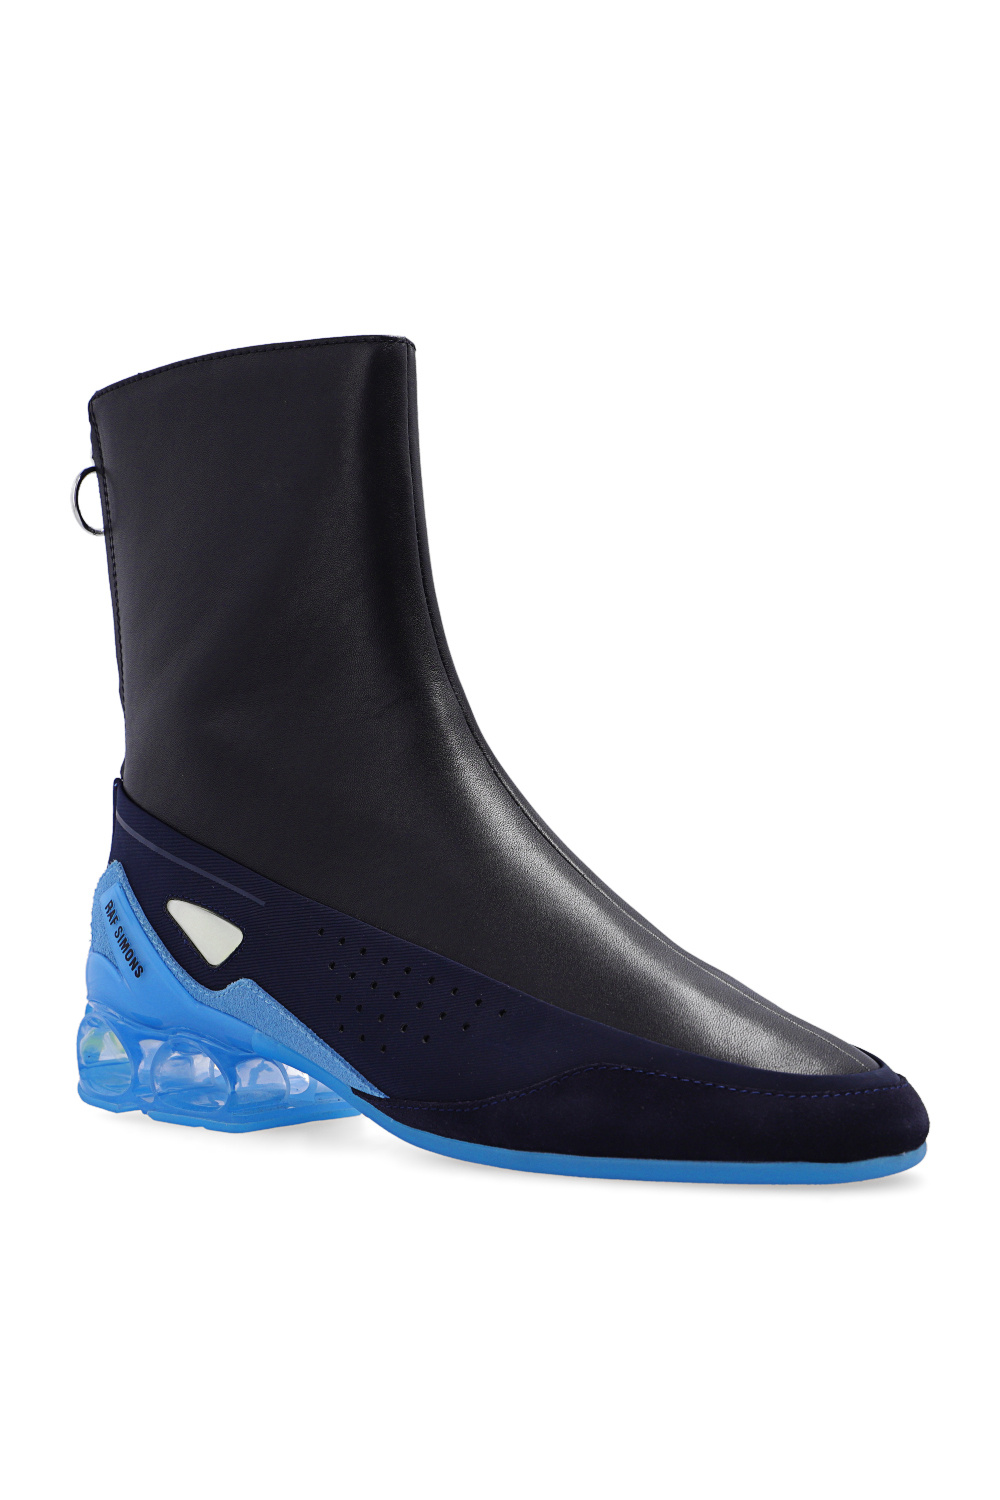 bobux Seedling Active low-top sneakers - 4' ankle boots Raf Simons 